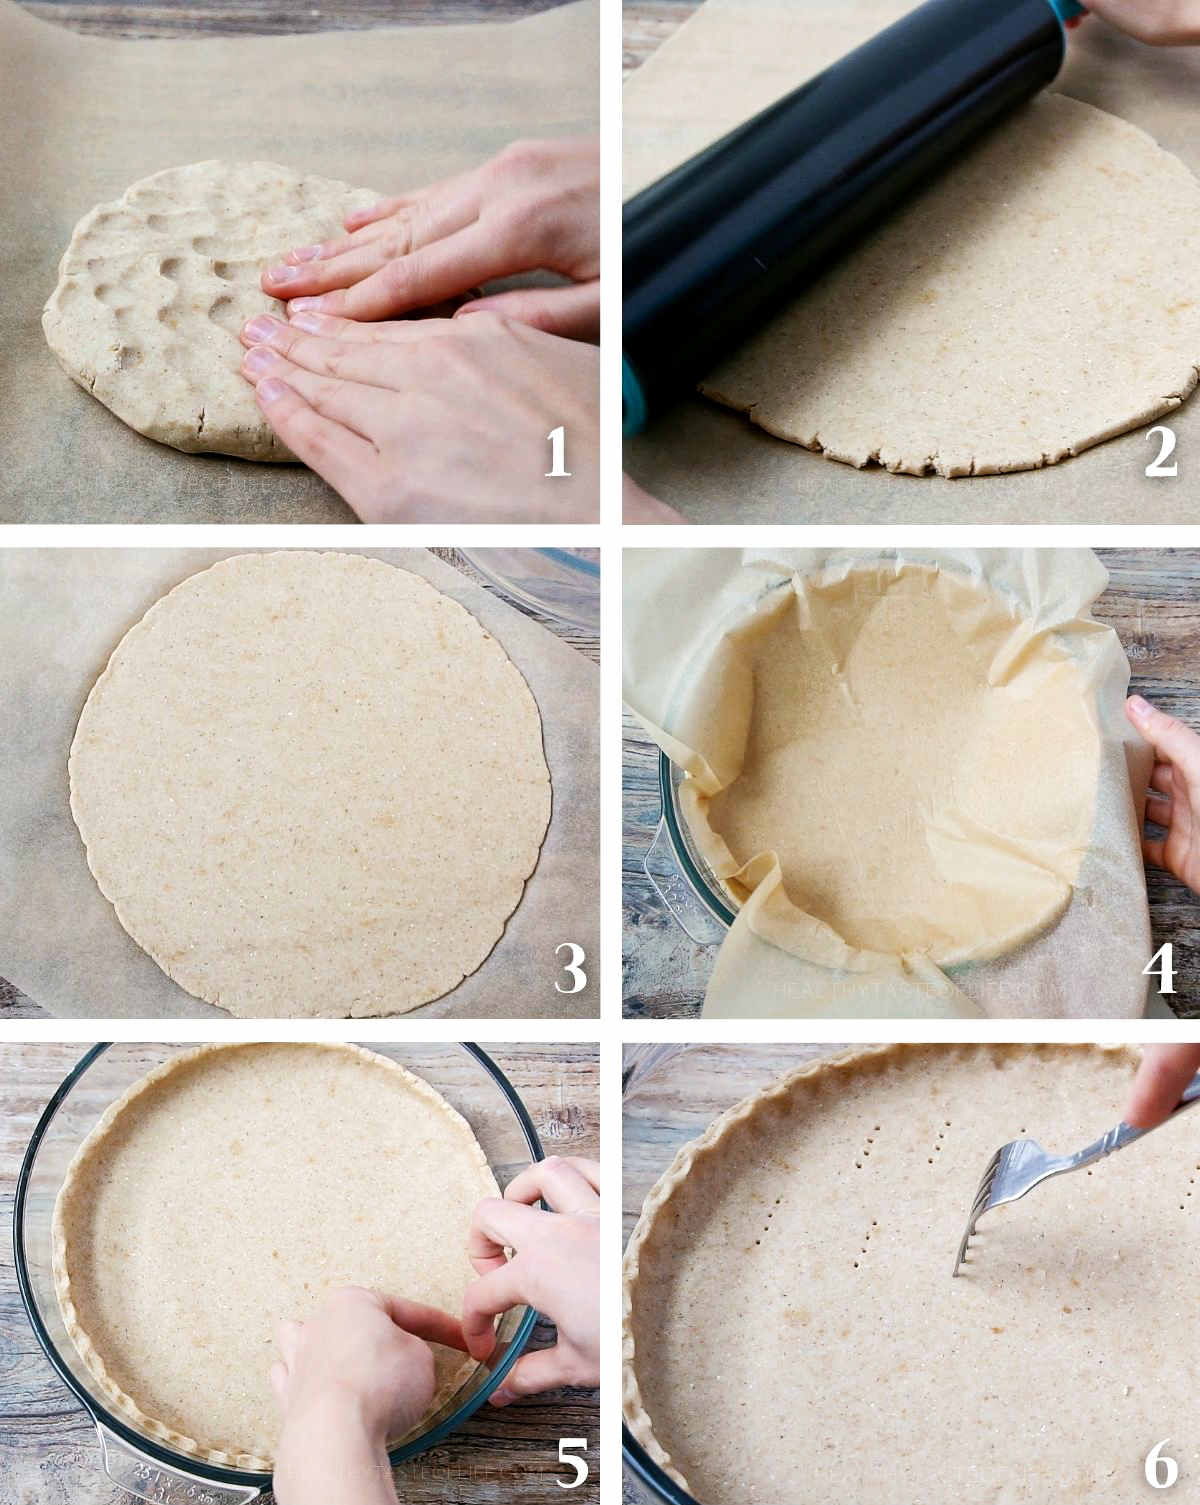 Process shots showing how to roll the vegan gluten free pie crust, how to arrange in the pie dish and prick with a fork for air release.